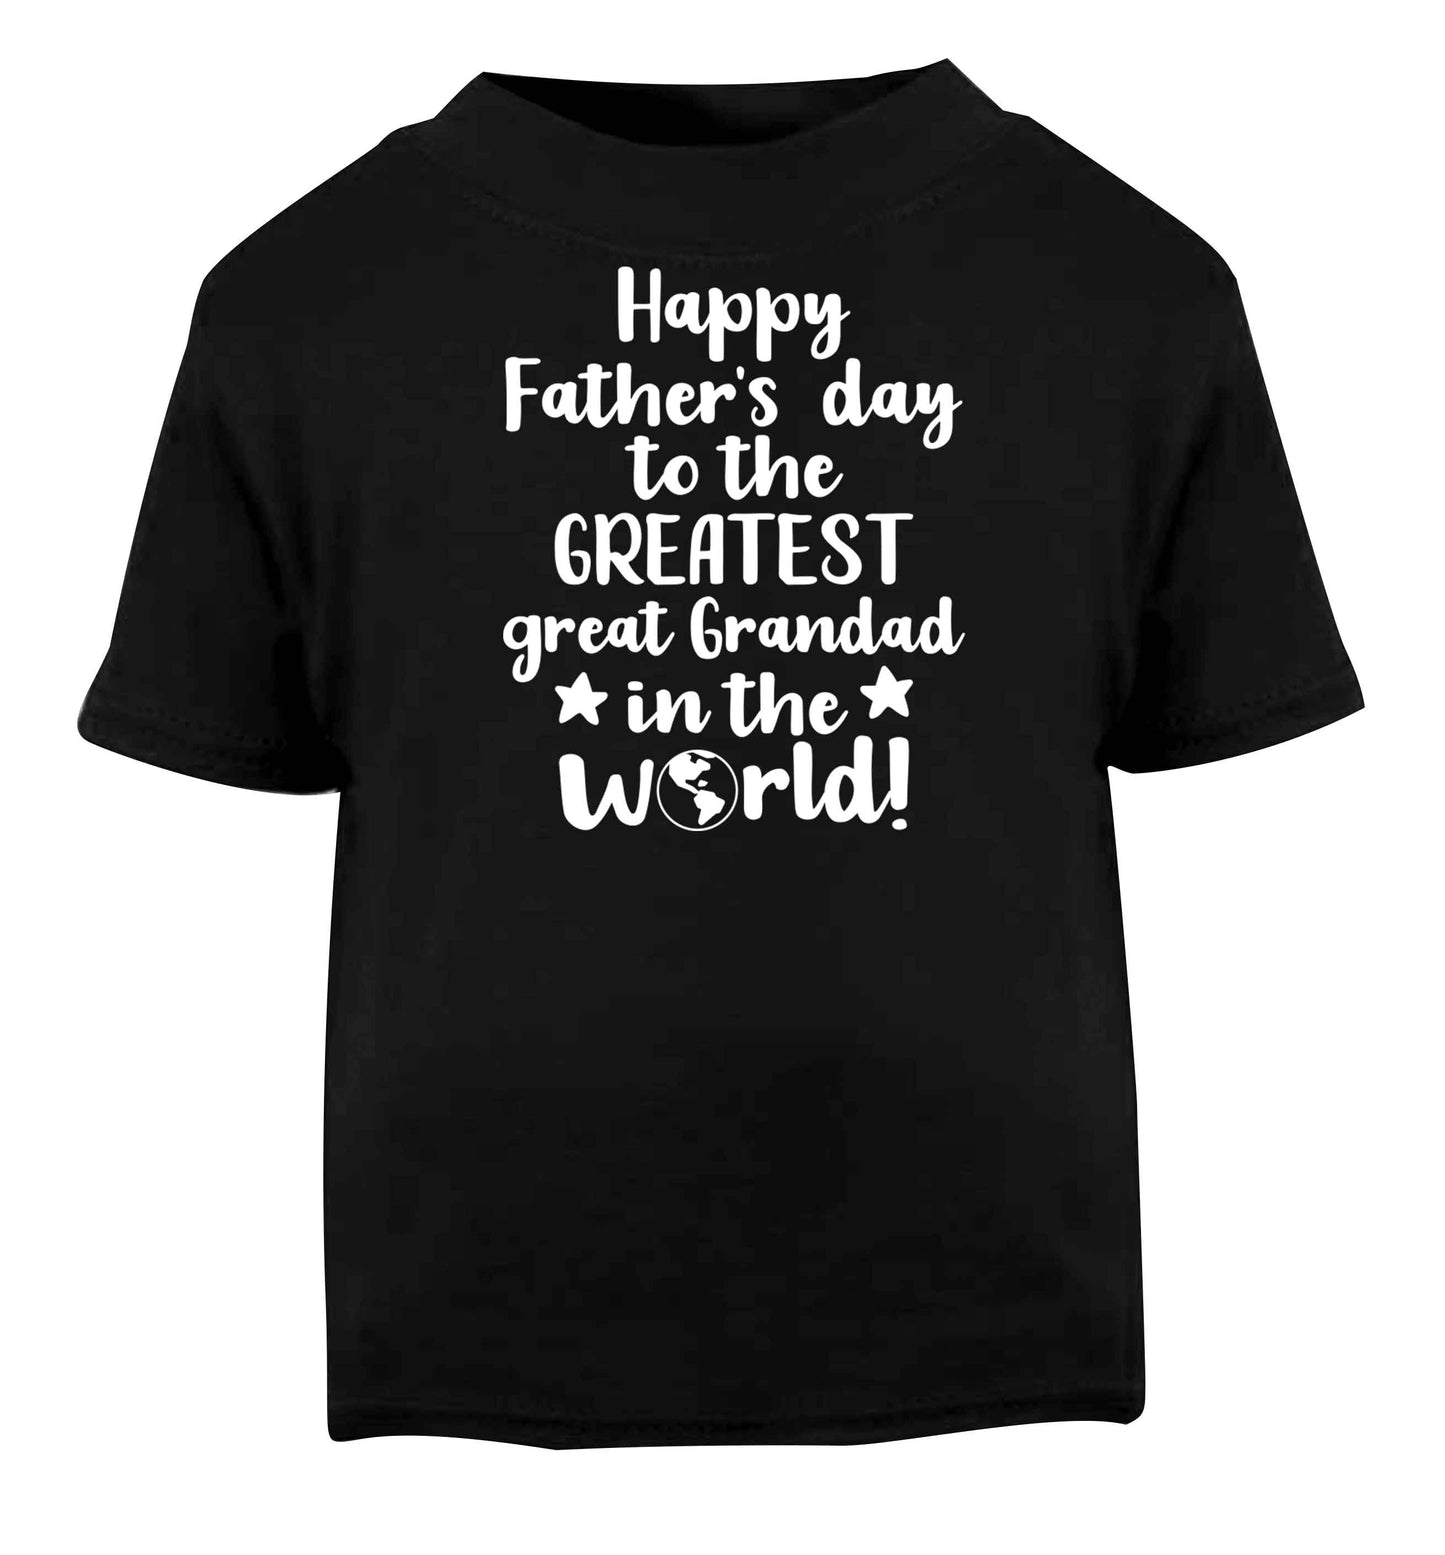 Happy Father's day to the greatest great grandad in the world Black baby toddler Tshirt 2 years